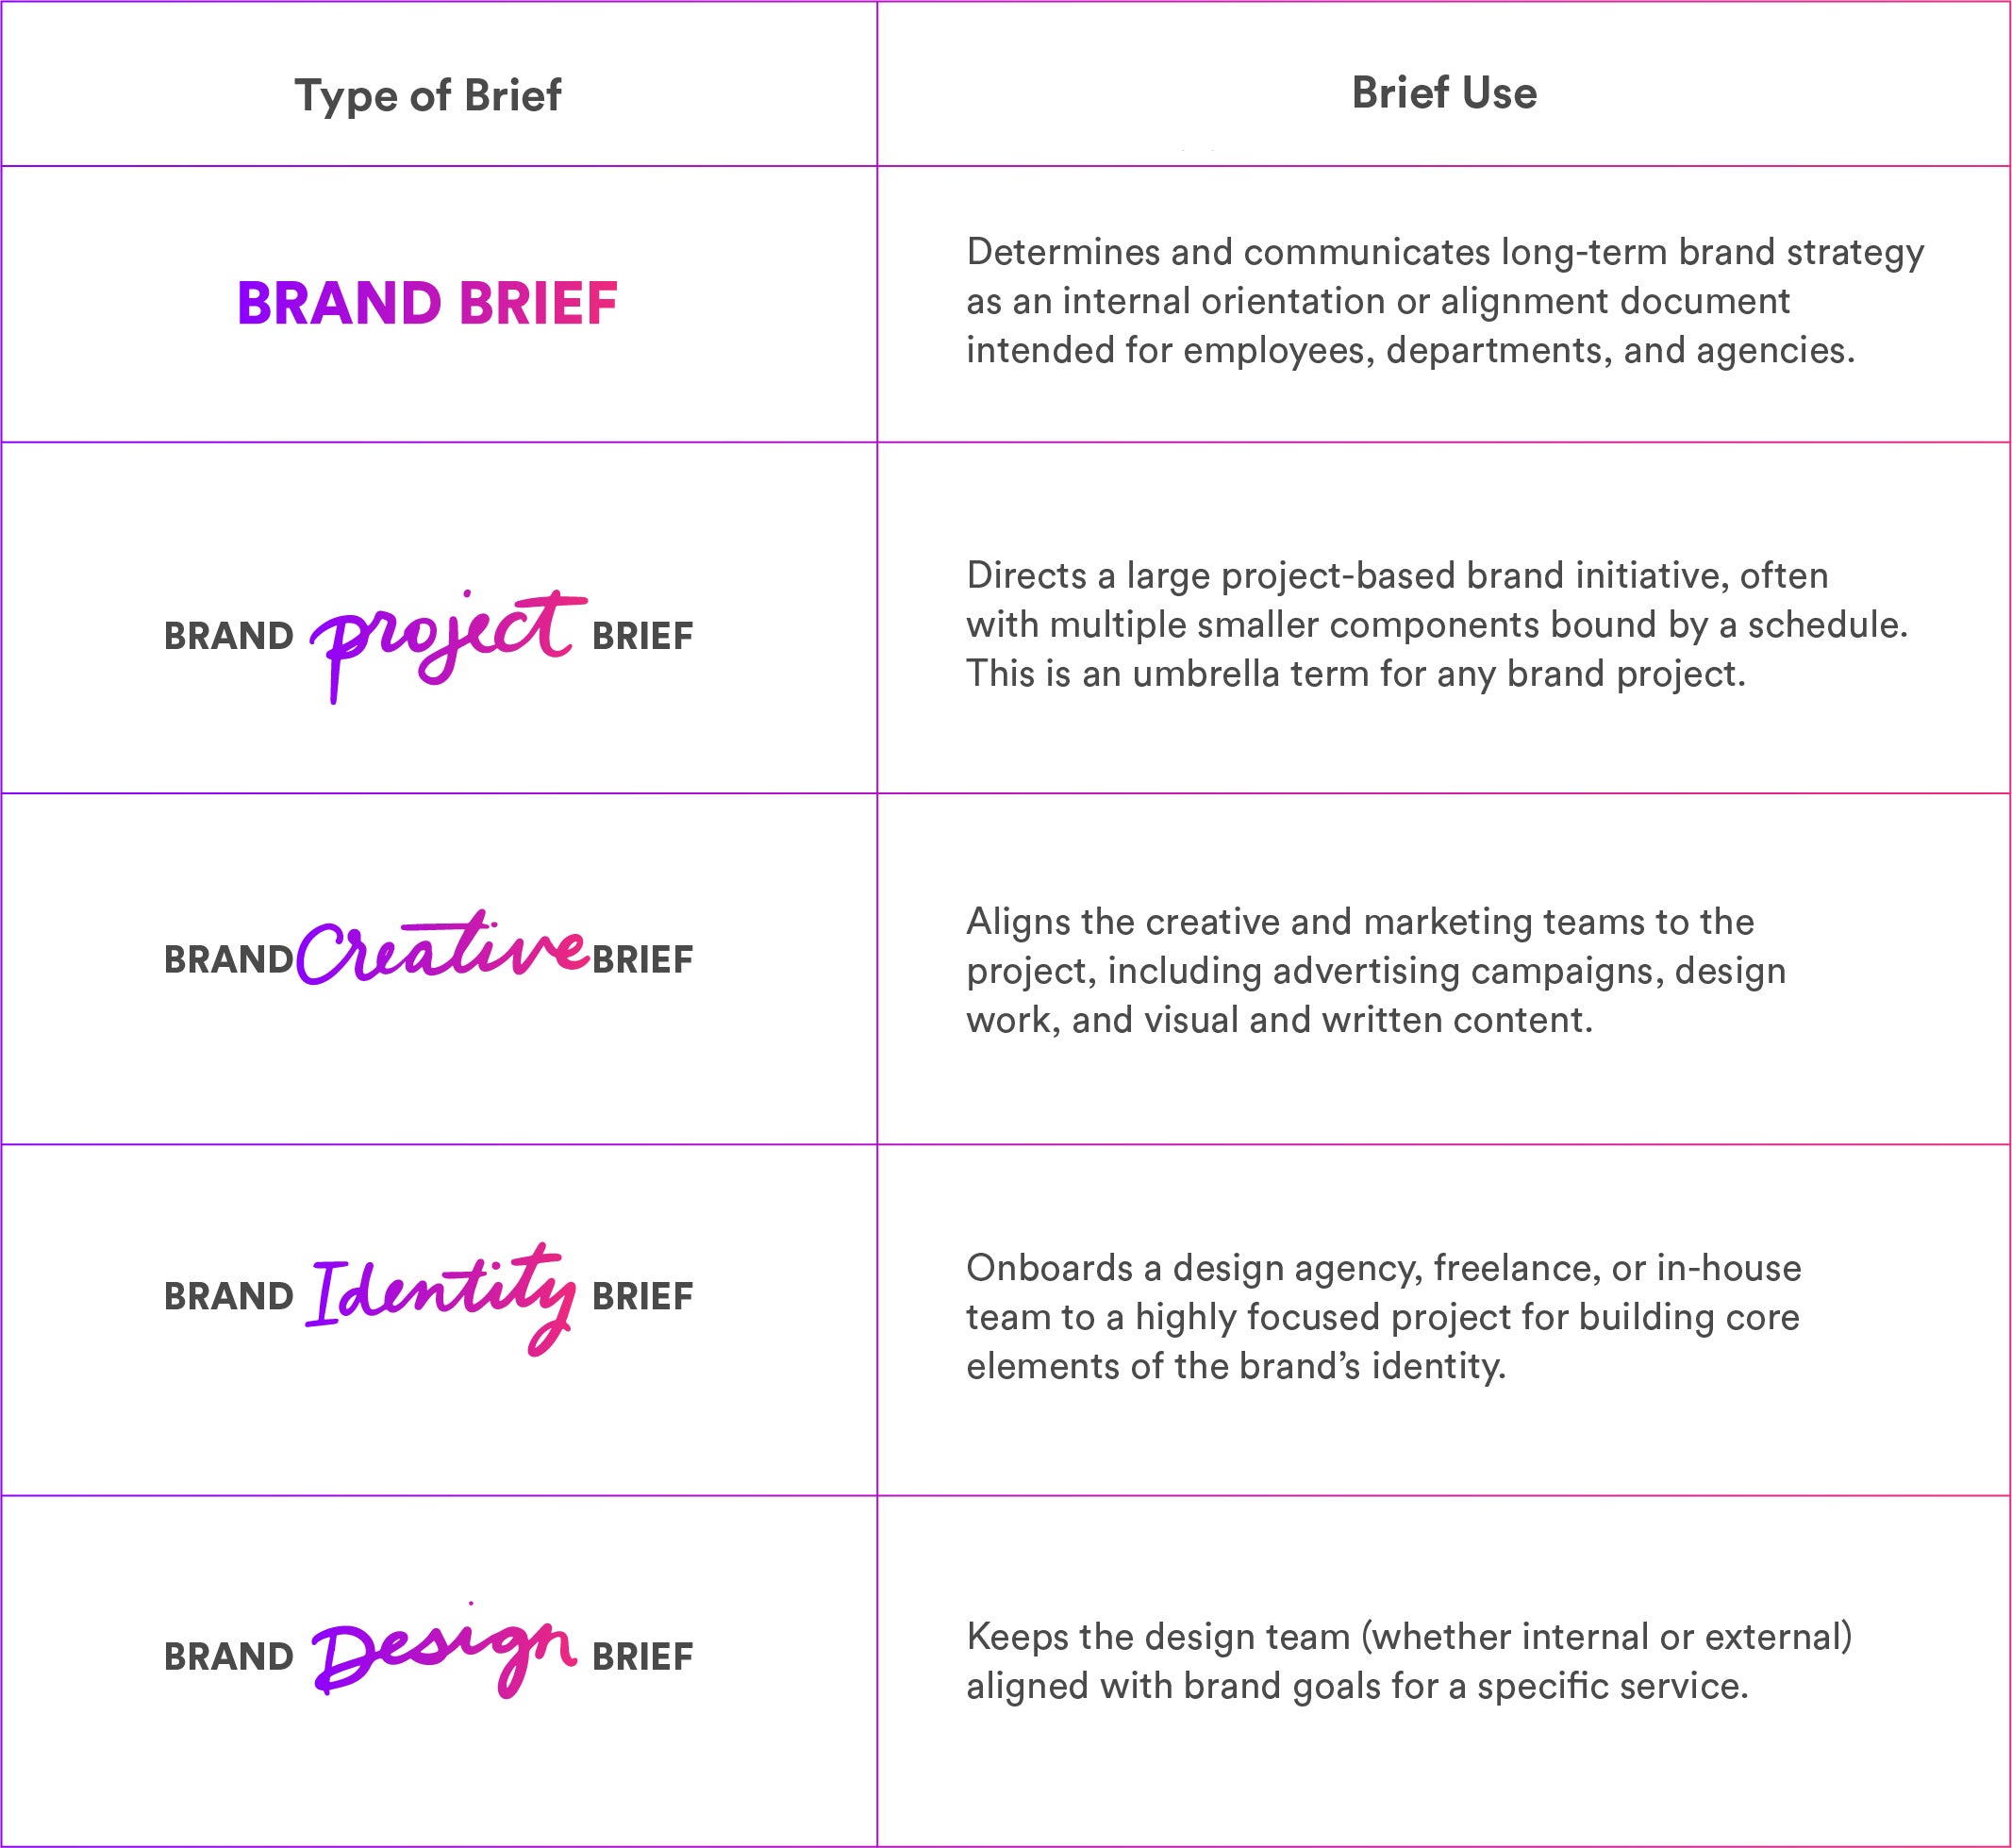 difference-between-brand-briefs